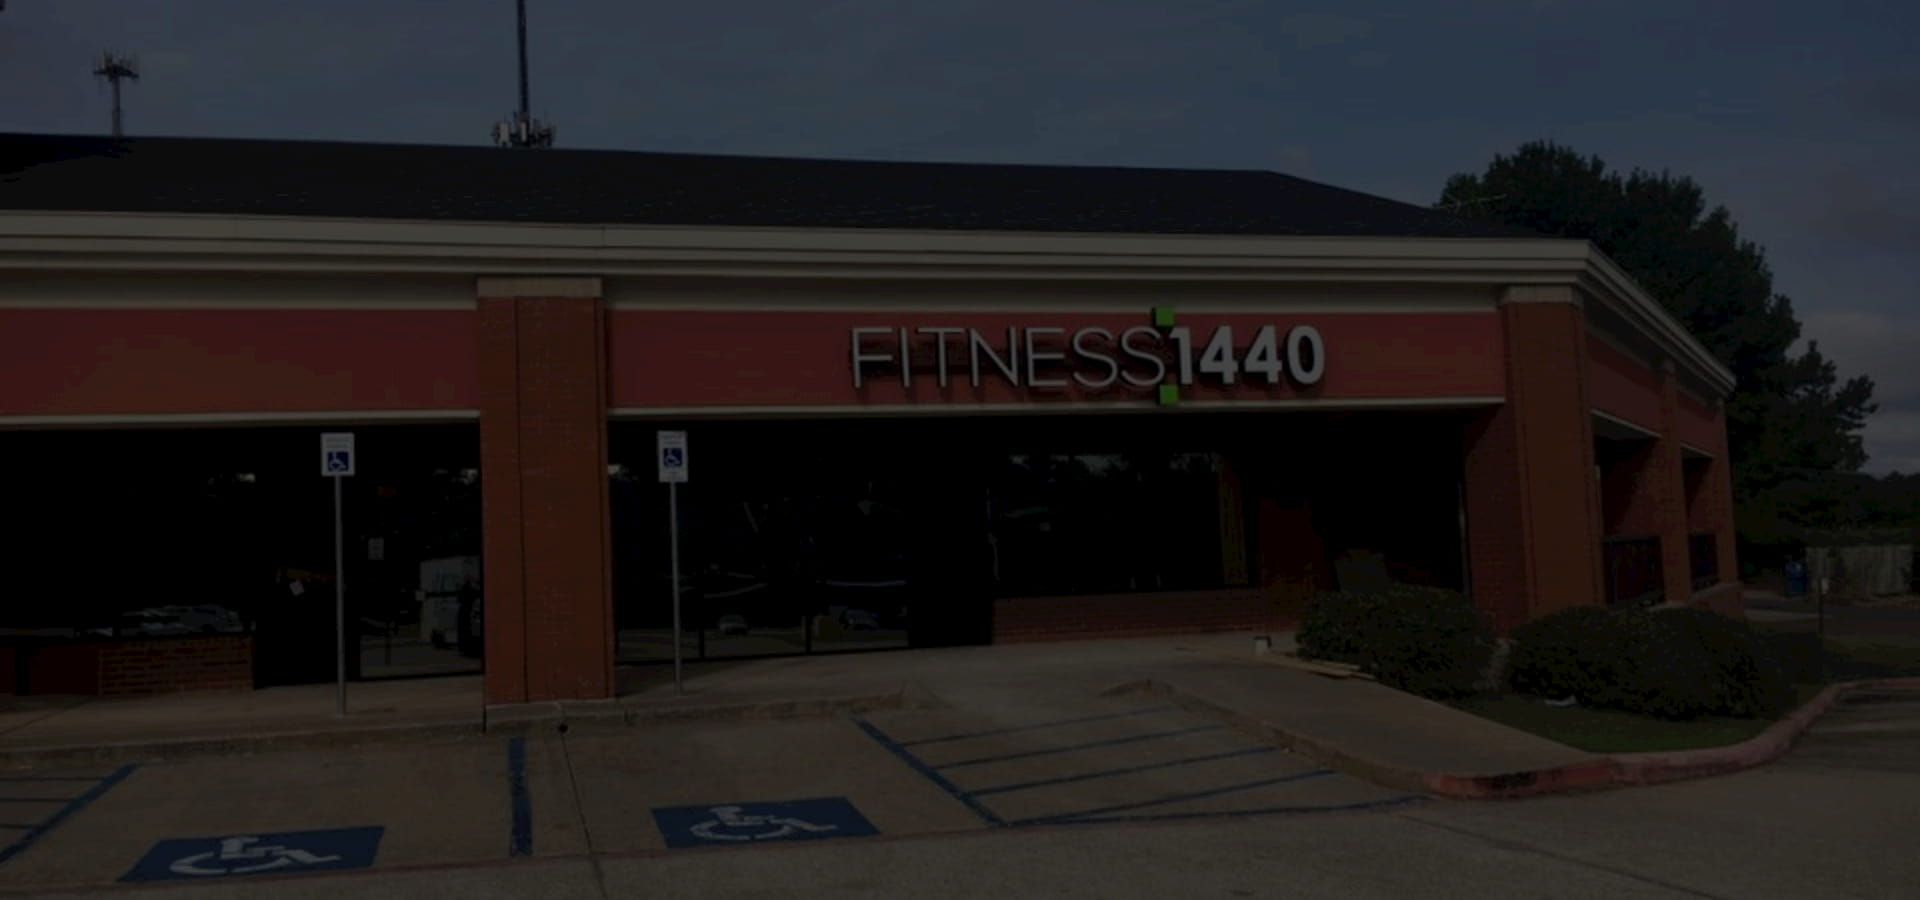 Wildts Wiring has worked with Fitness 1440!